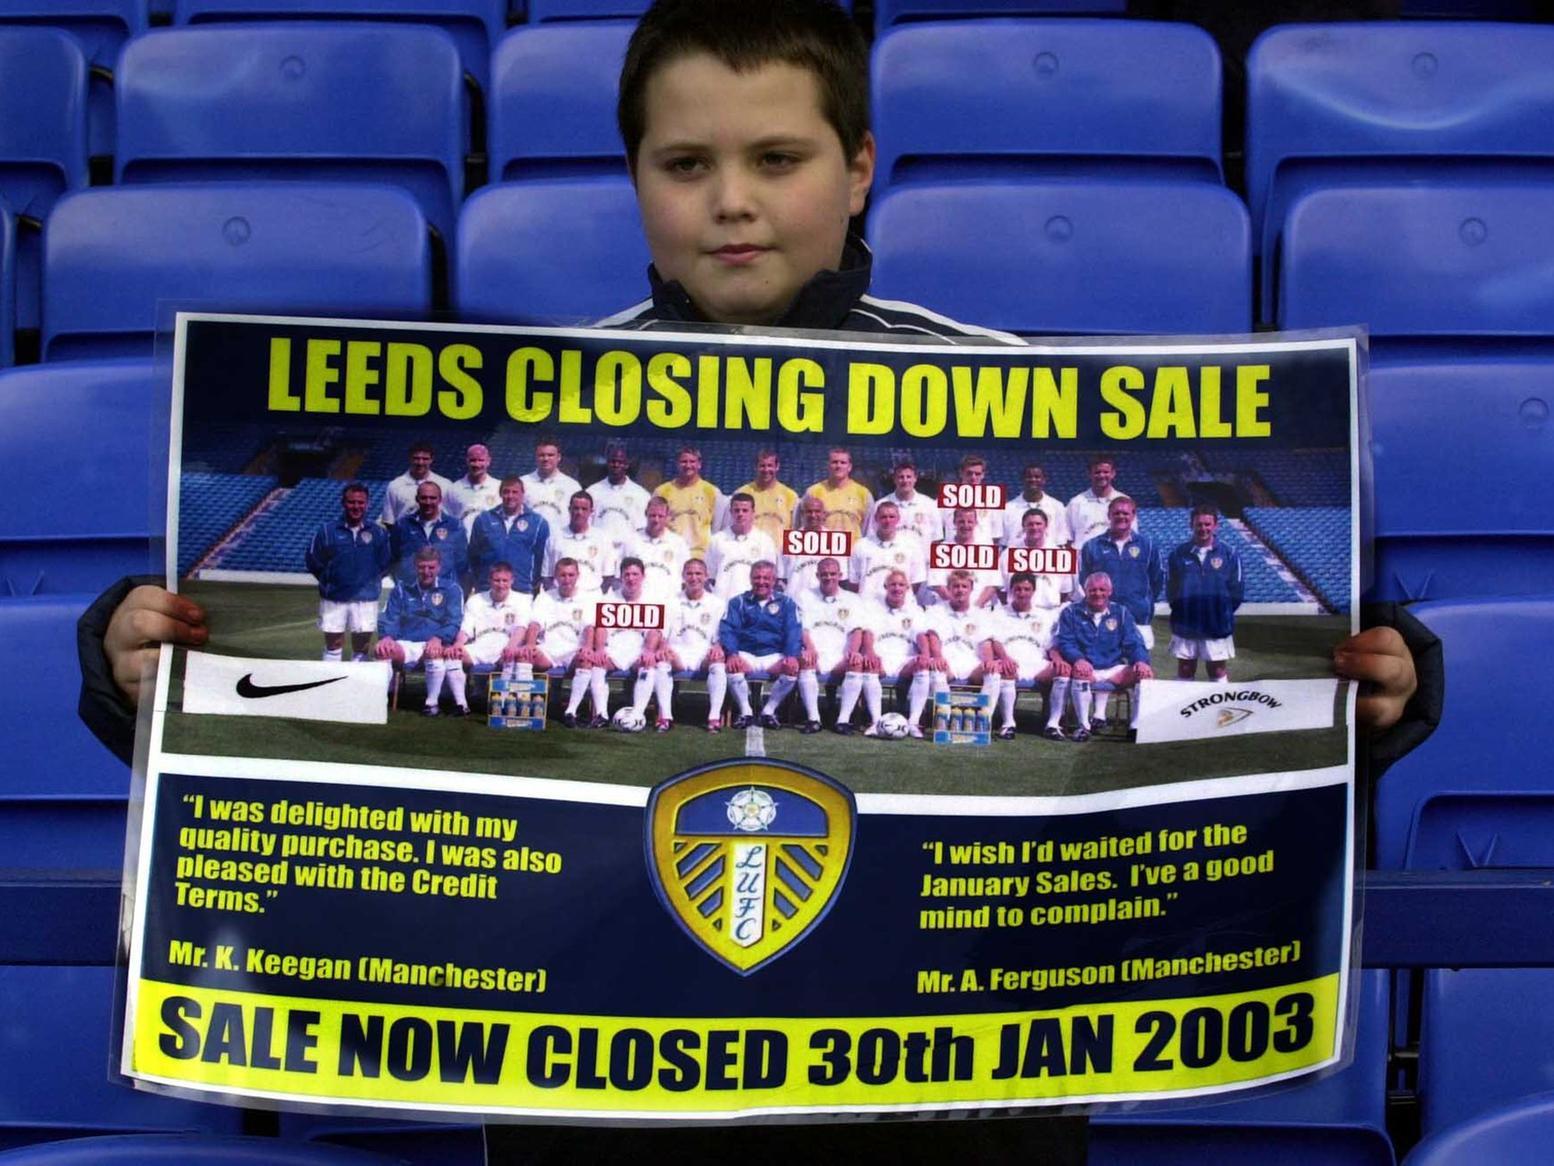 The Elland Road faithful were restless. This is young Nick Sharples pictured ahead of Leeds United's clash with Everton at Goodison Park, with a poster his dad made for him.